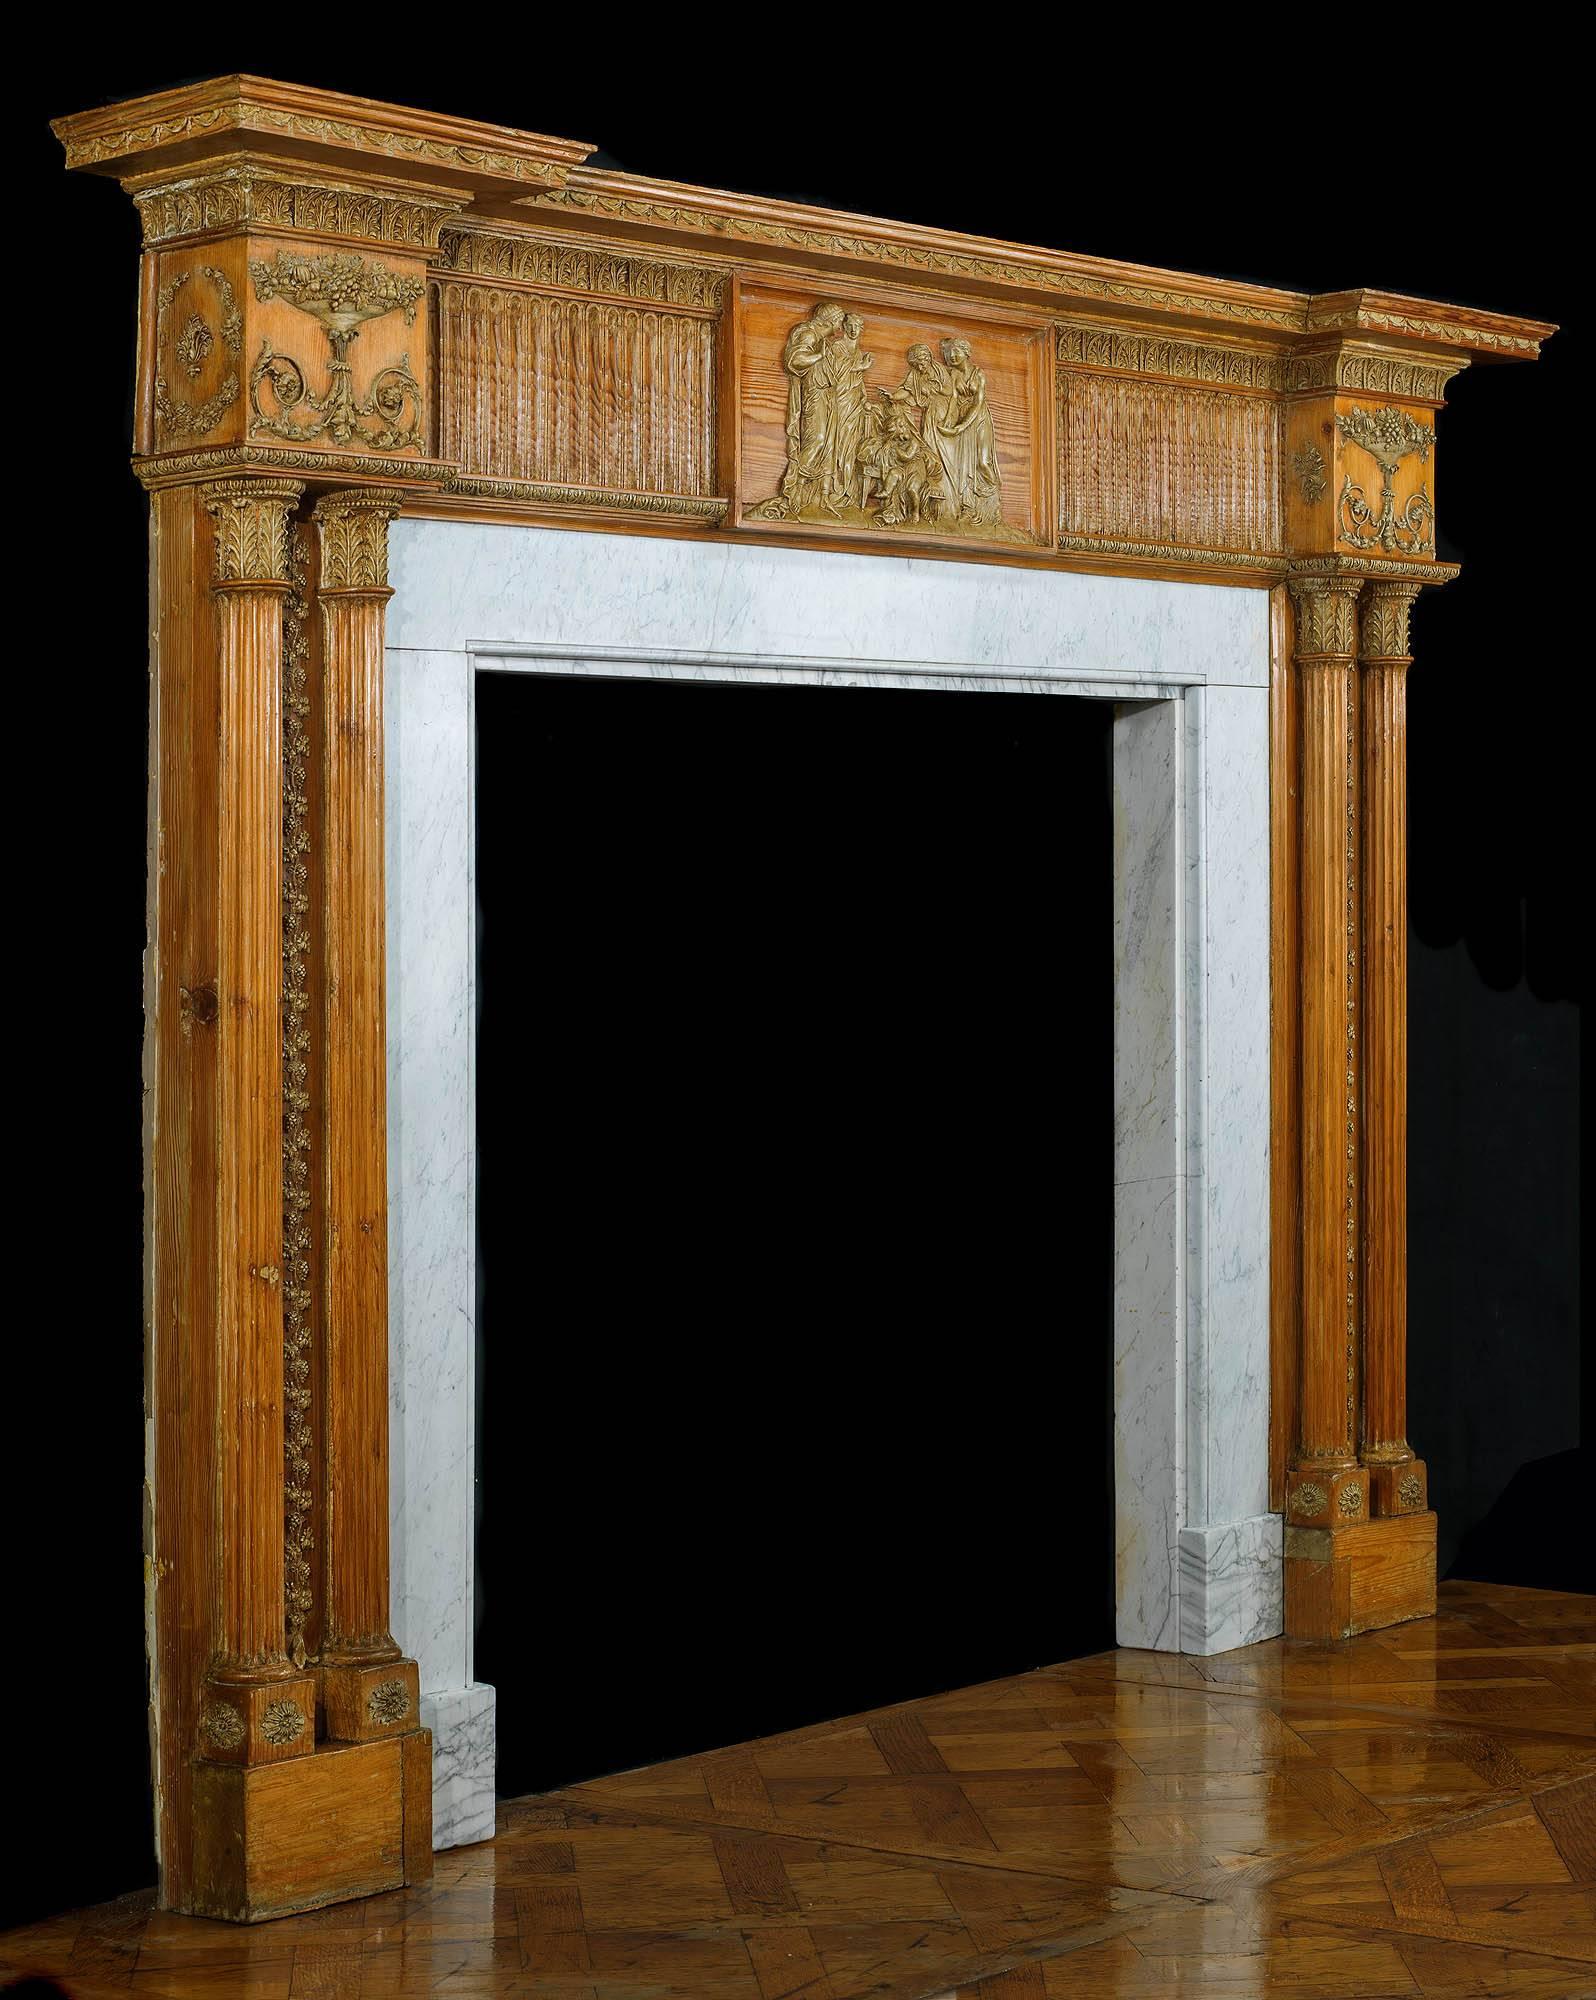 A grand and large George III twin columned warm toned pine and gesso Georgian chimneypiece with its original Carrara marble slips. The fluted and athemion decorated frieze is centred by a plaque depicting four Classical Greek figures around a